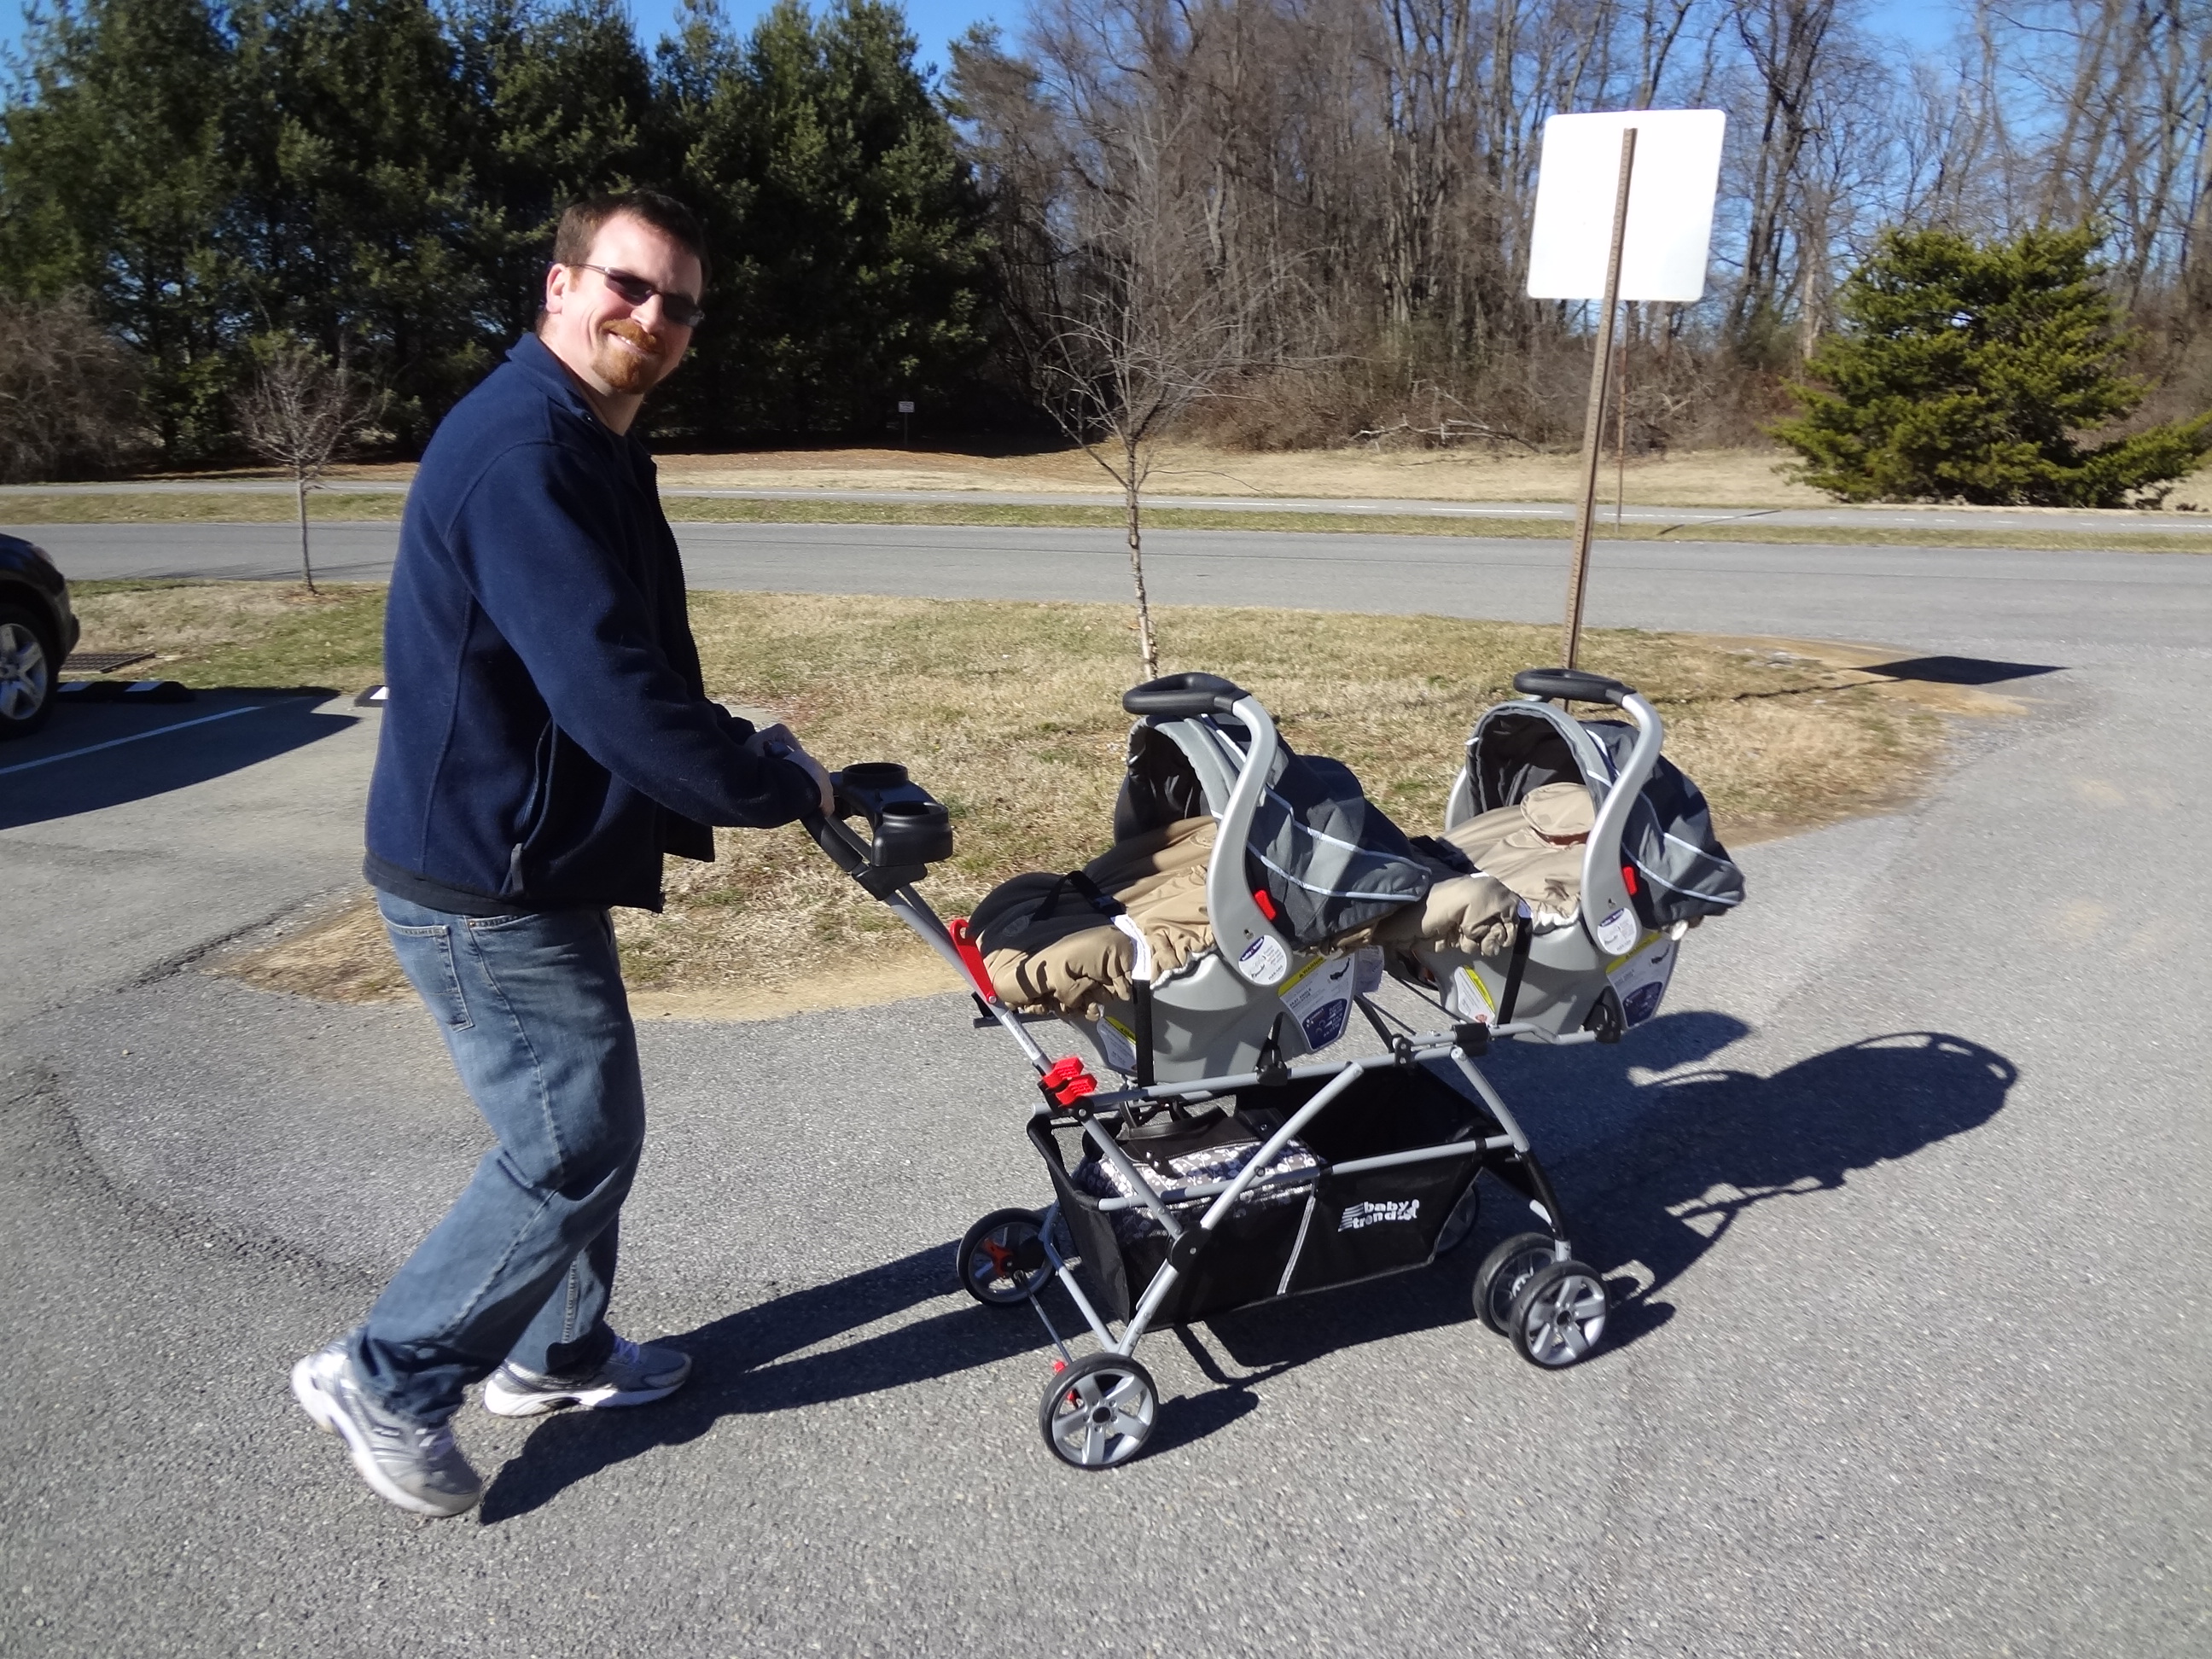 snap and go double stroller